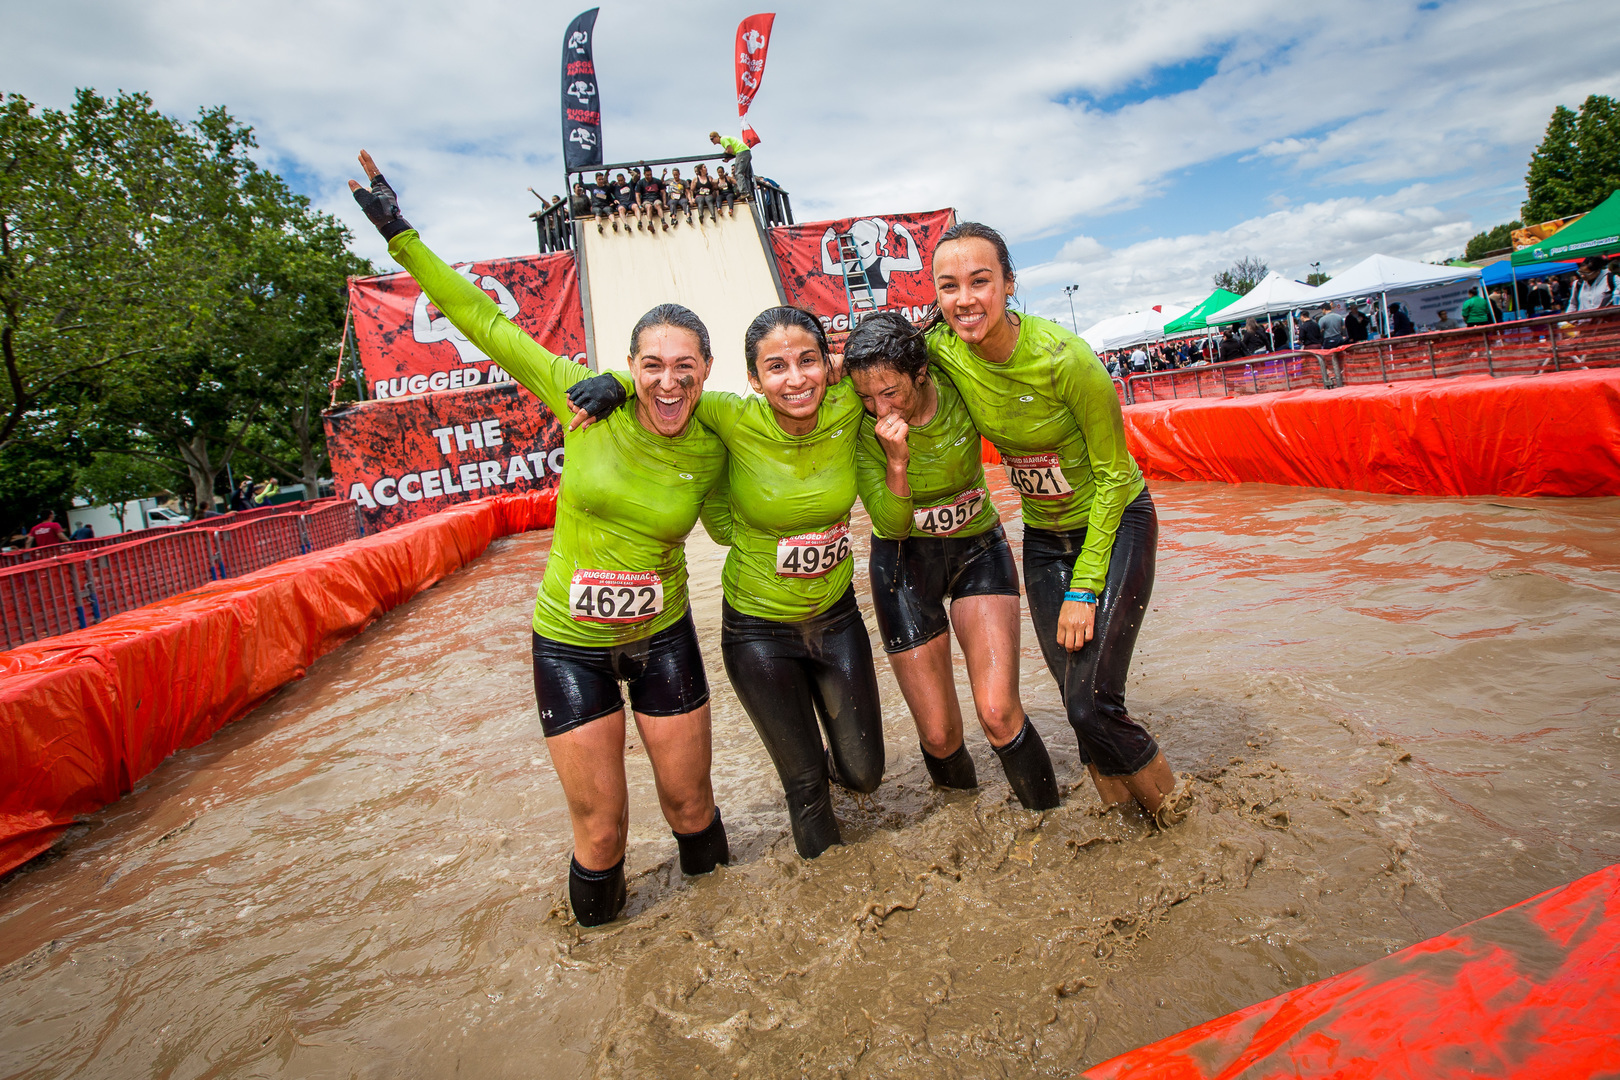 Rugged Maniac 5k Obstacle Race - New York City, New York, United States